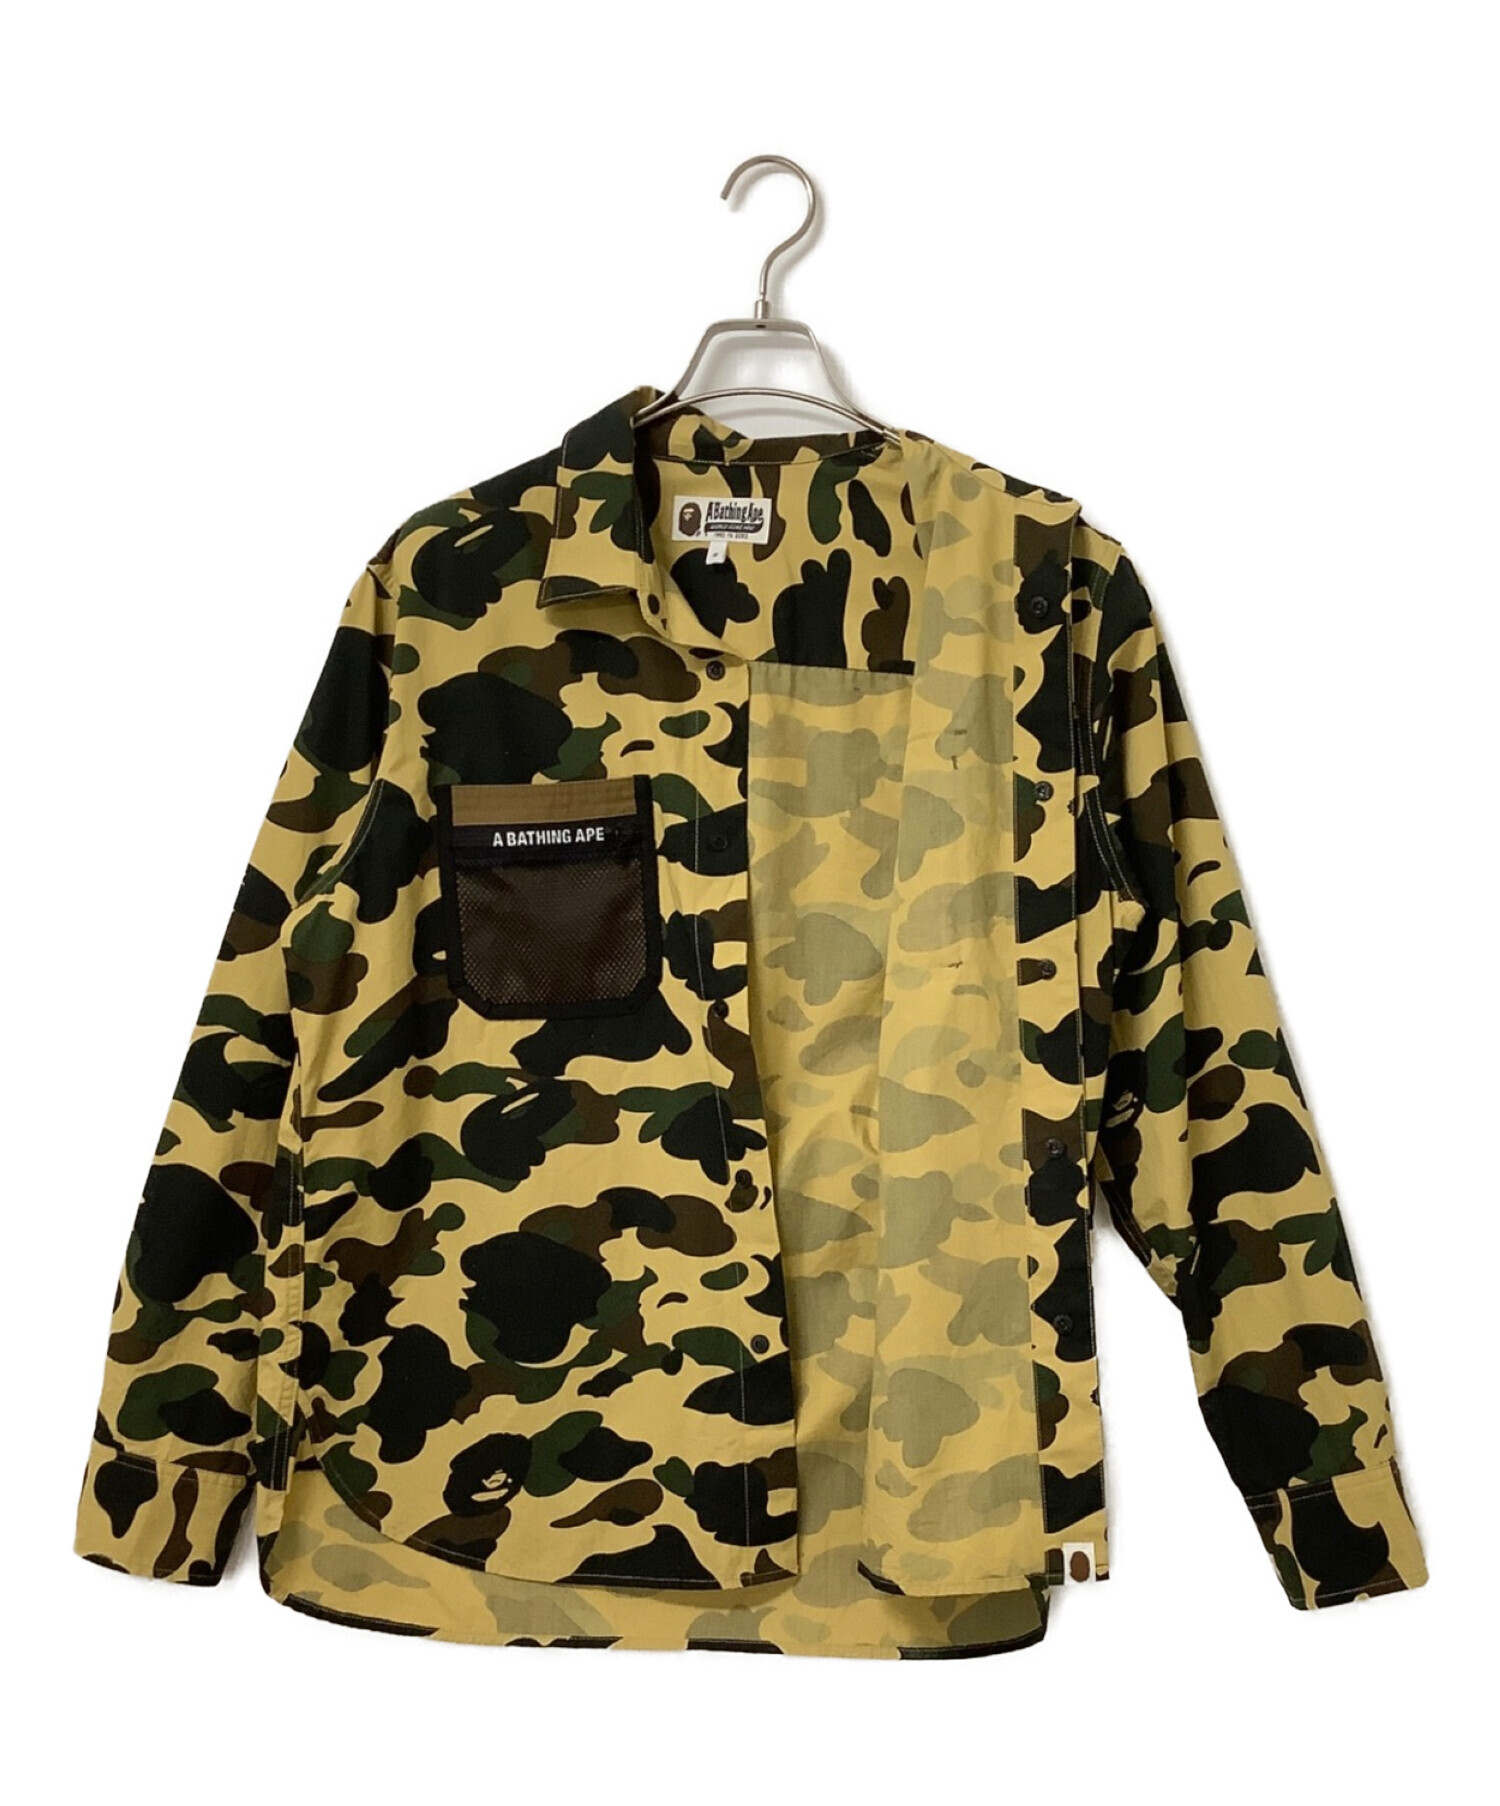 A BATHING APE (アベイシングエイプ) 1ST CAMO OUTDOOR DETAIL POCKET RELAXED FIT SHIRT  カーキ サイズ:S